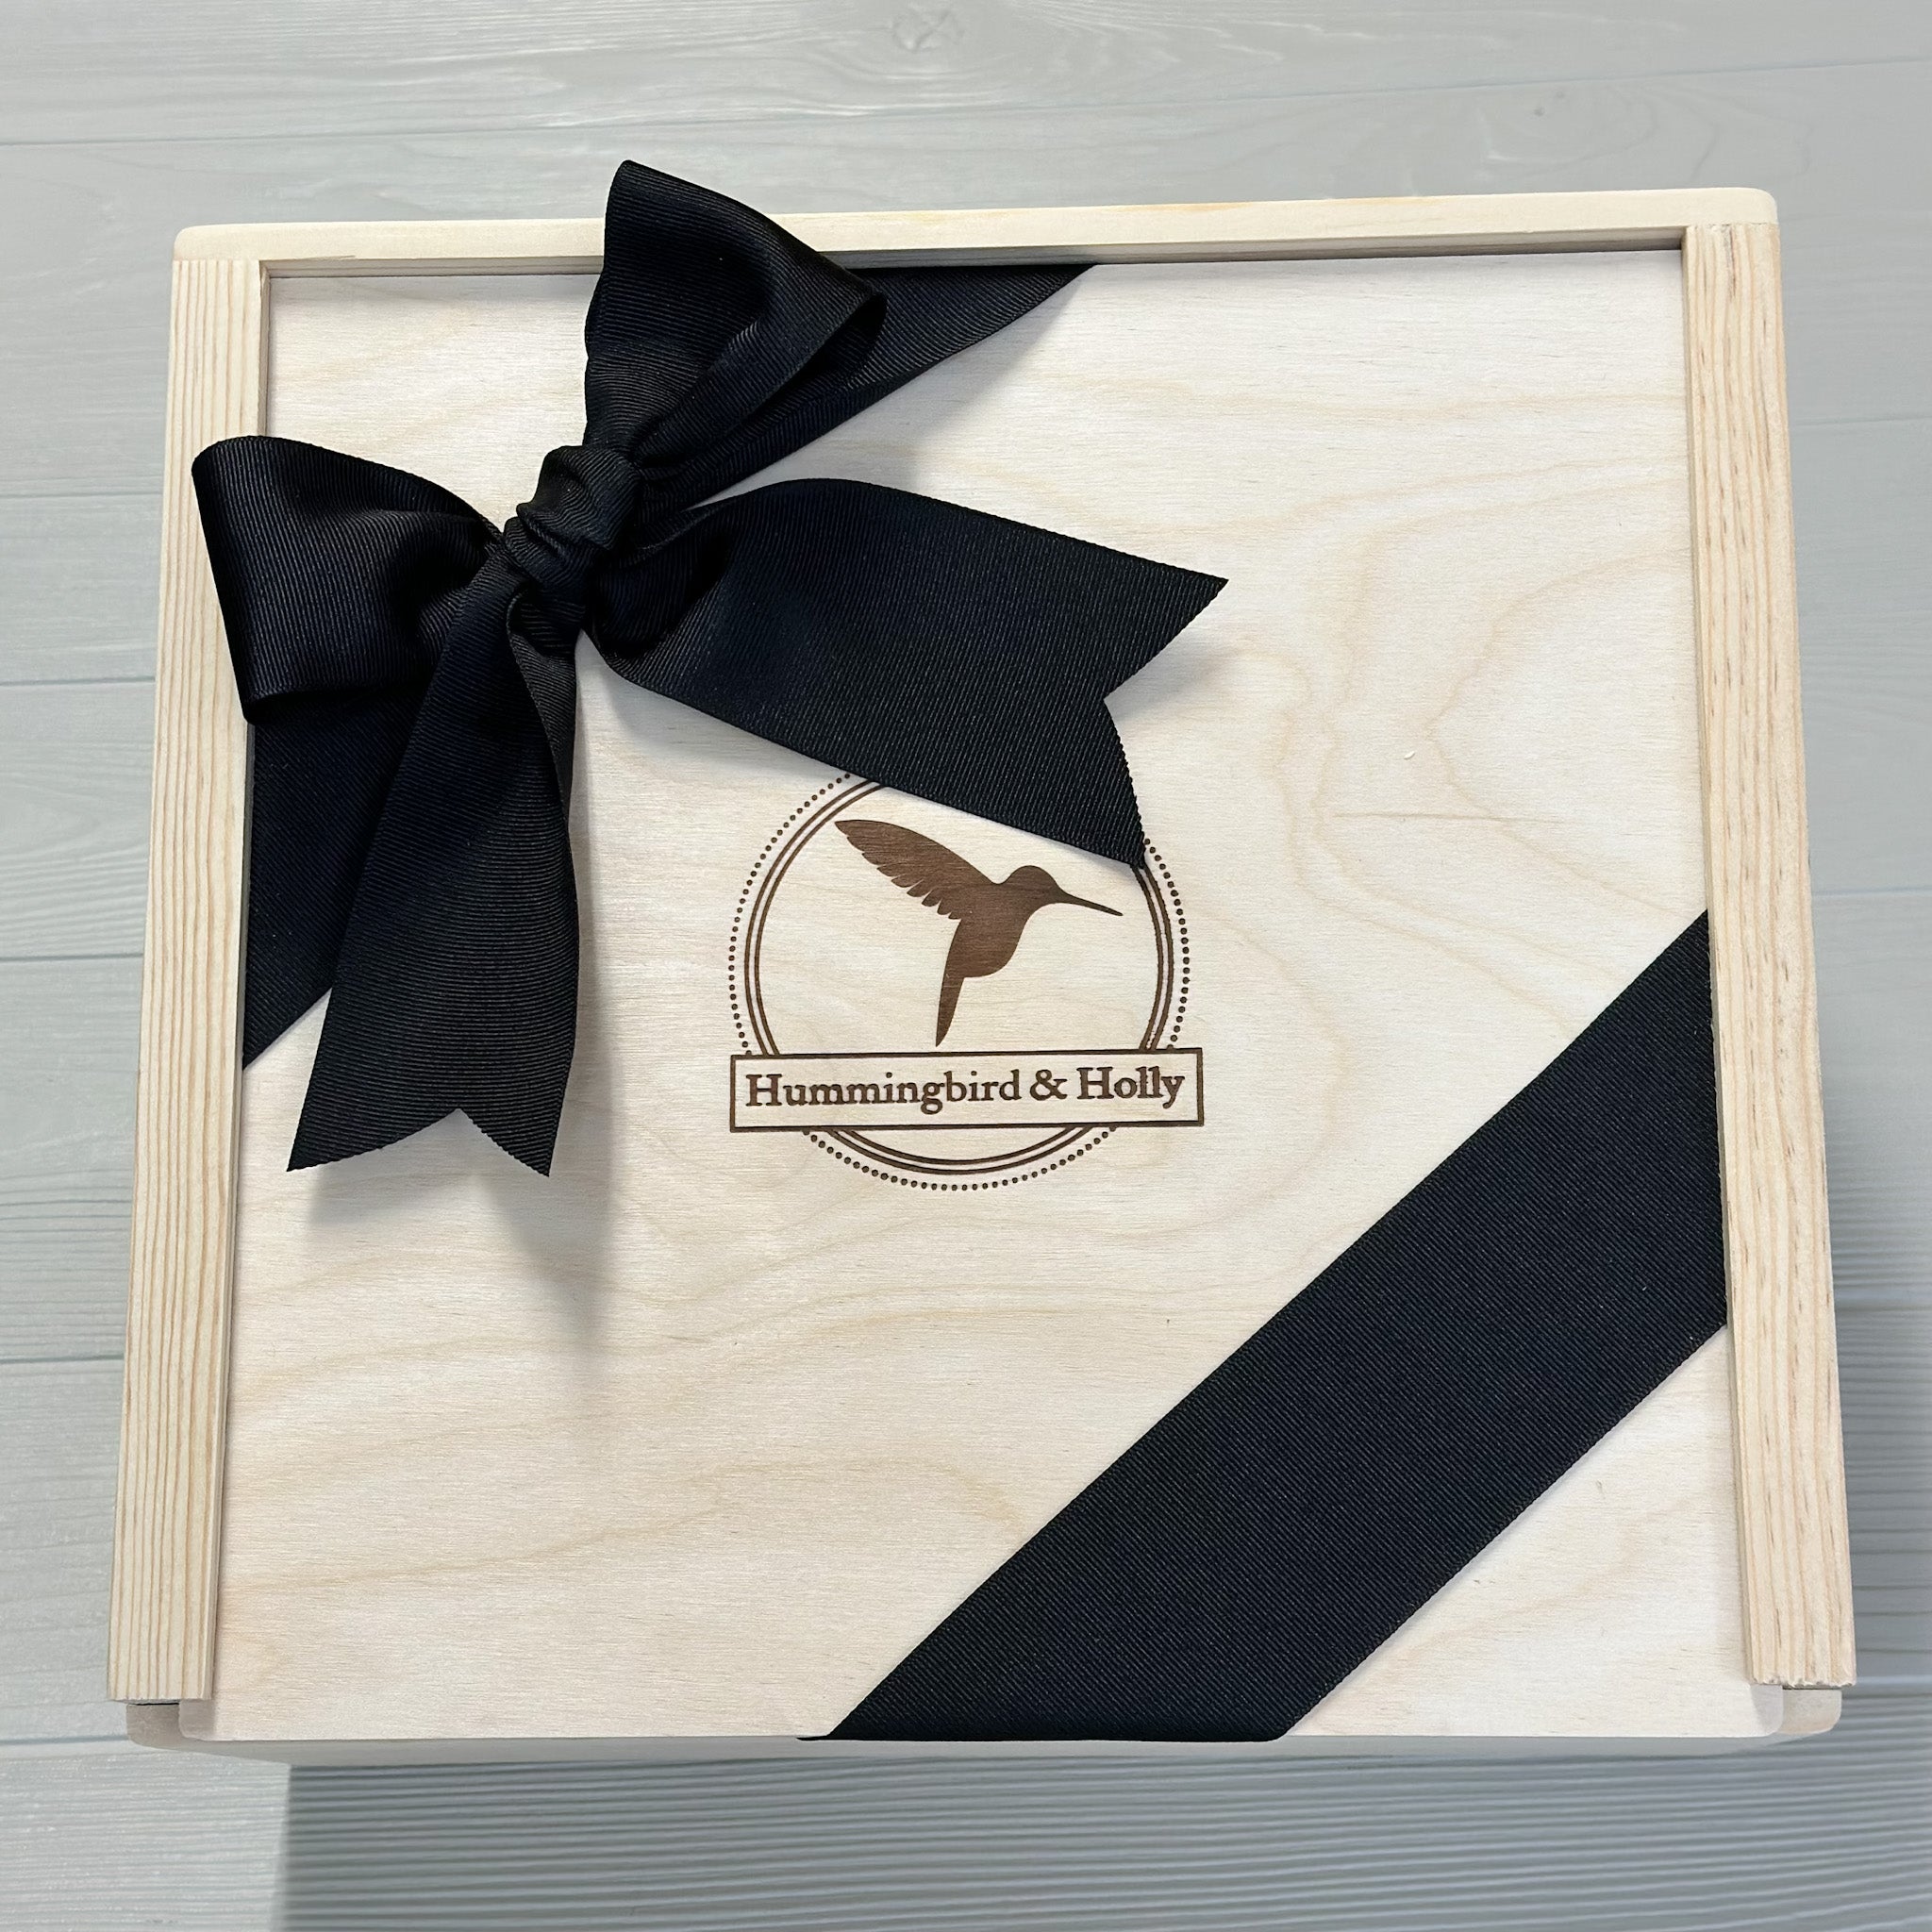 close up of our locally made wooden slide lid gift box included in our sip and sparkle gift basket